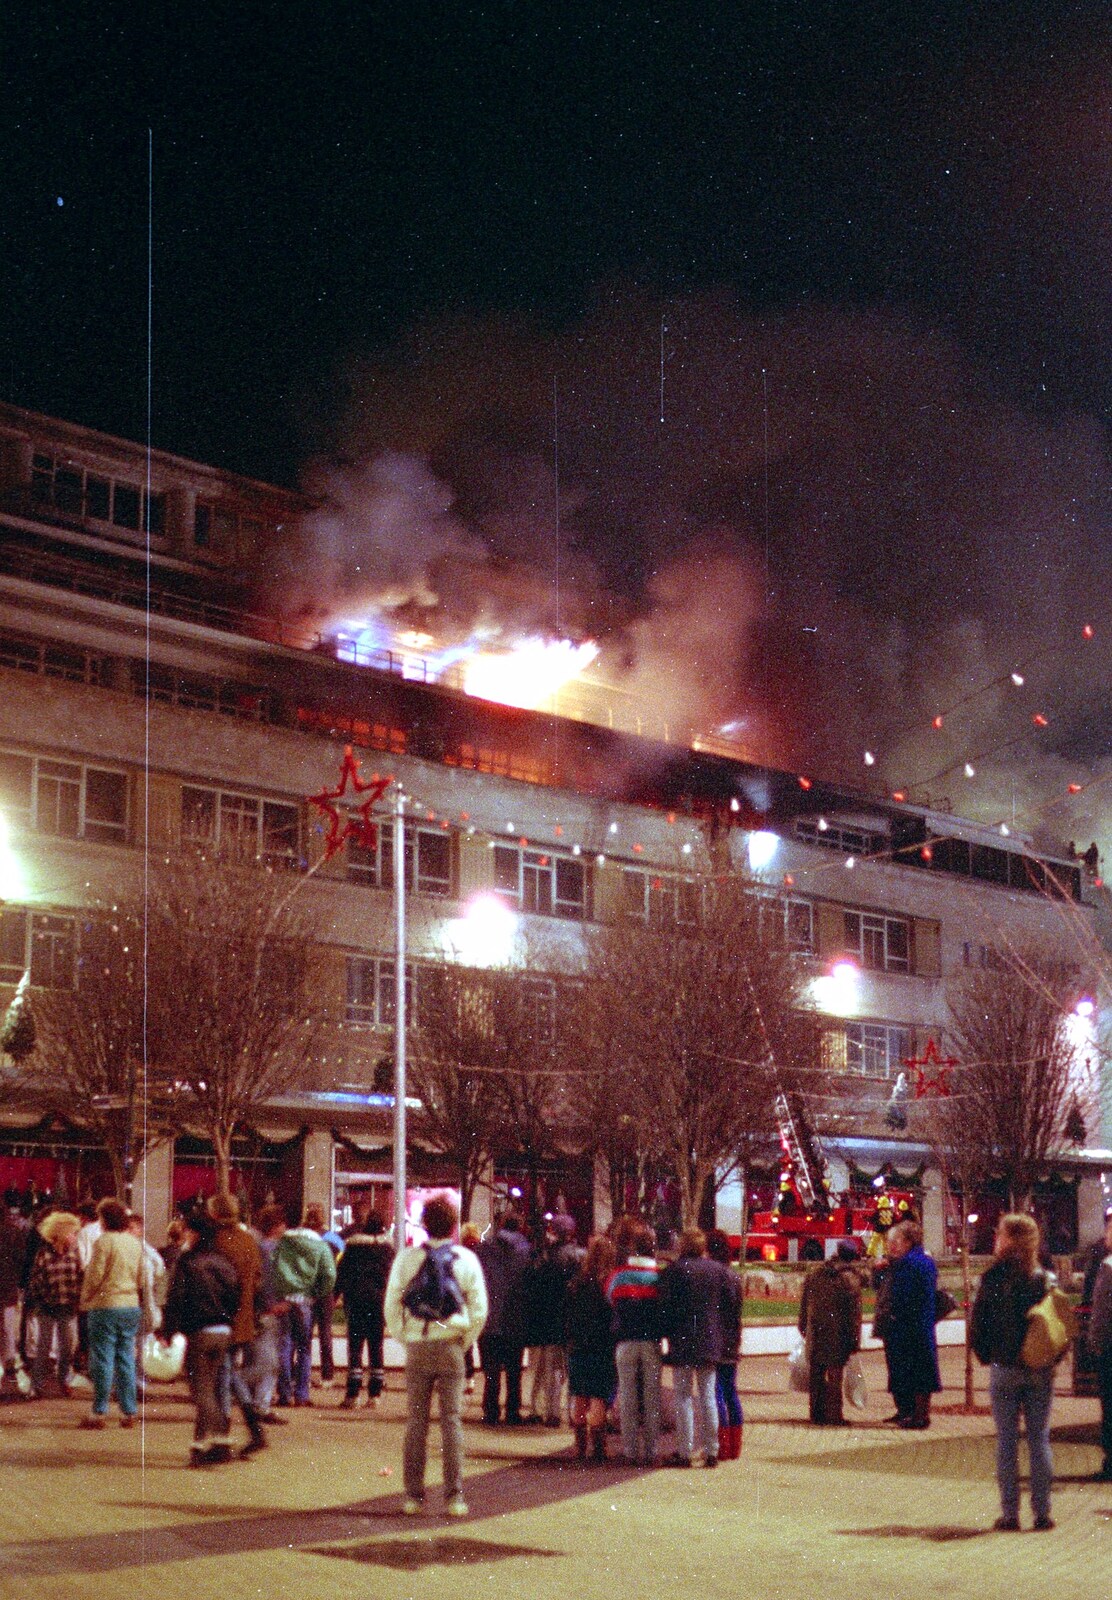 The crowds hang around from Uni: The Fire-Bombing of Dingles, Plymouth, Devon - 19th December 1988